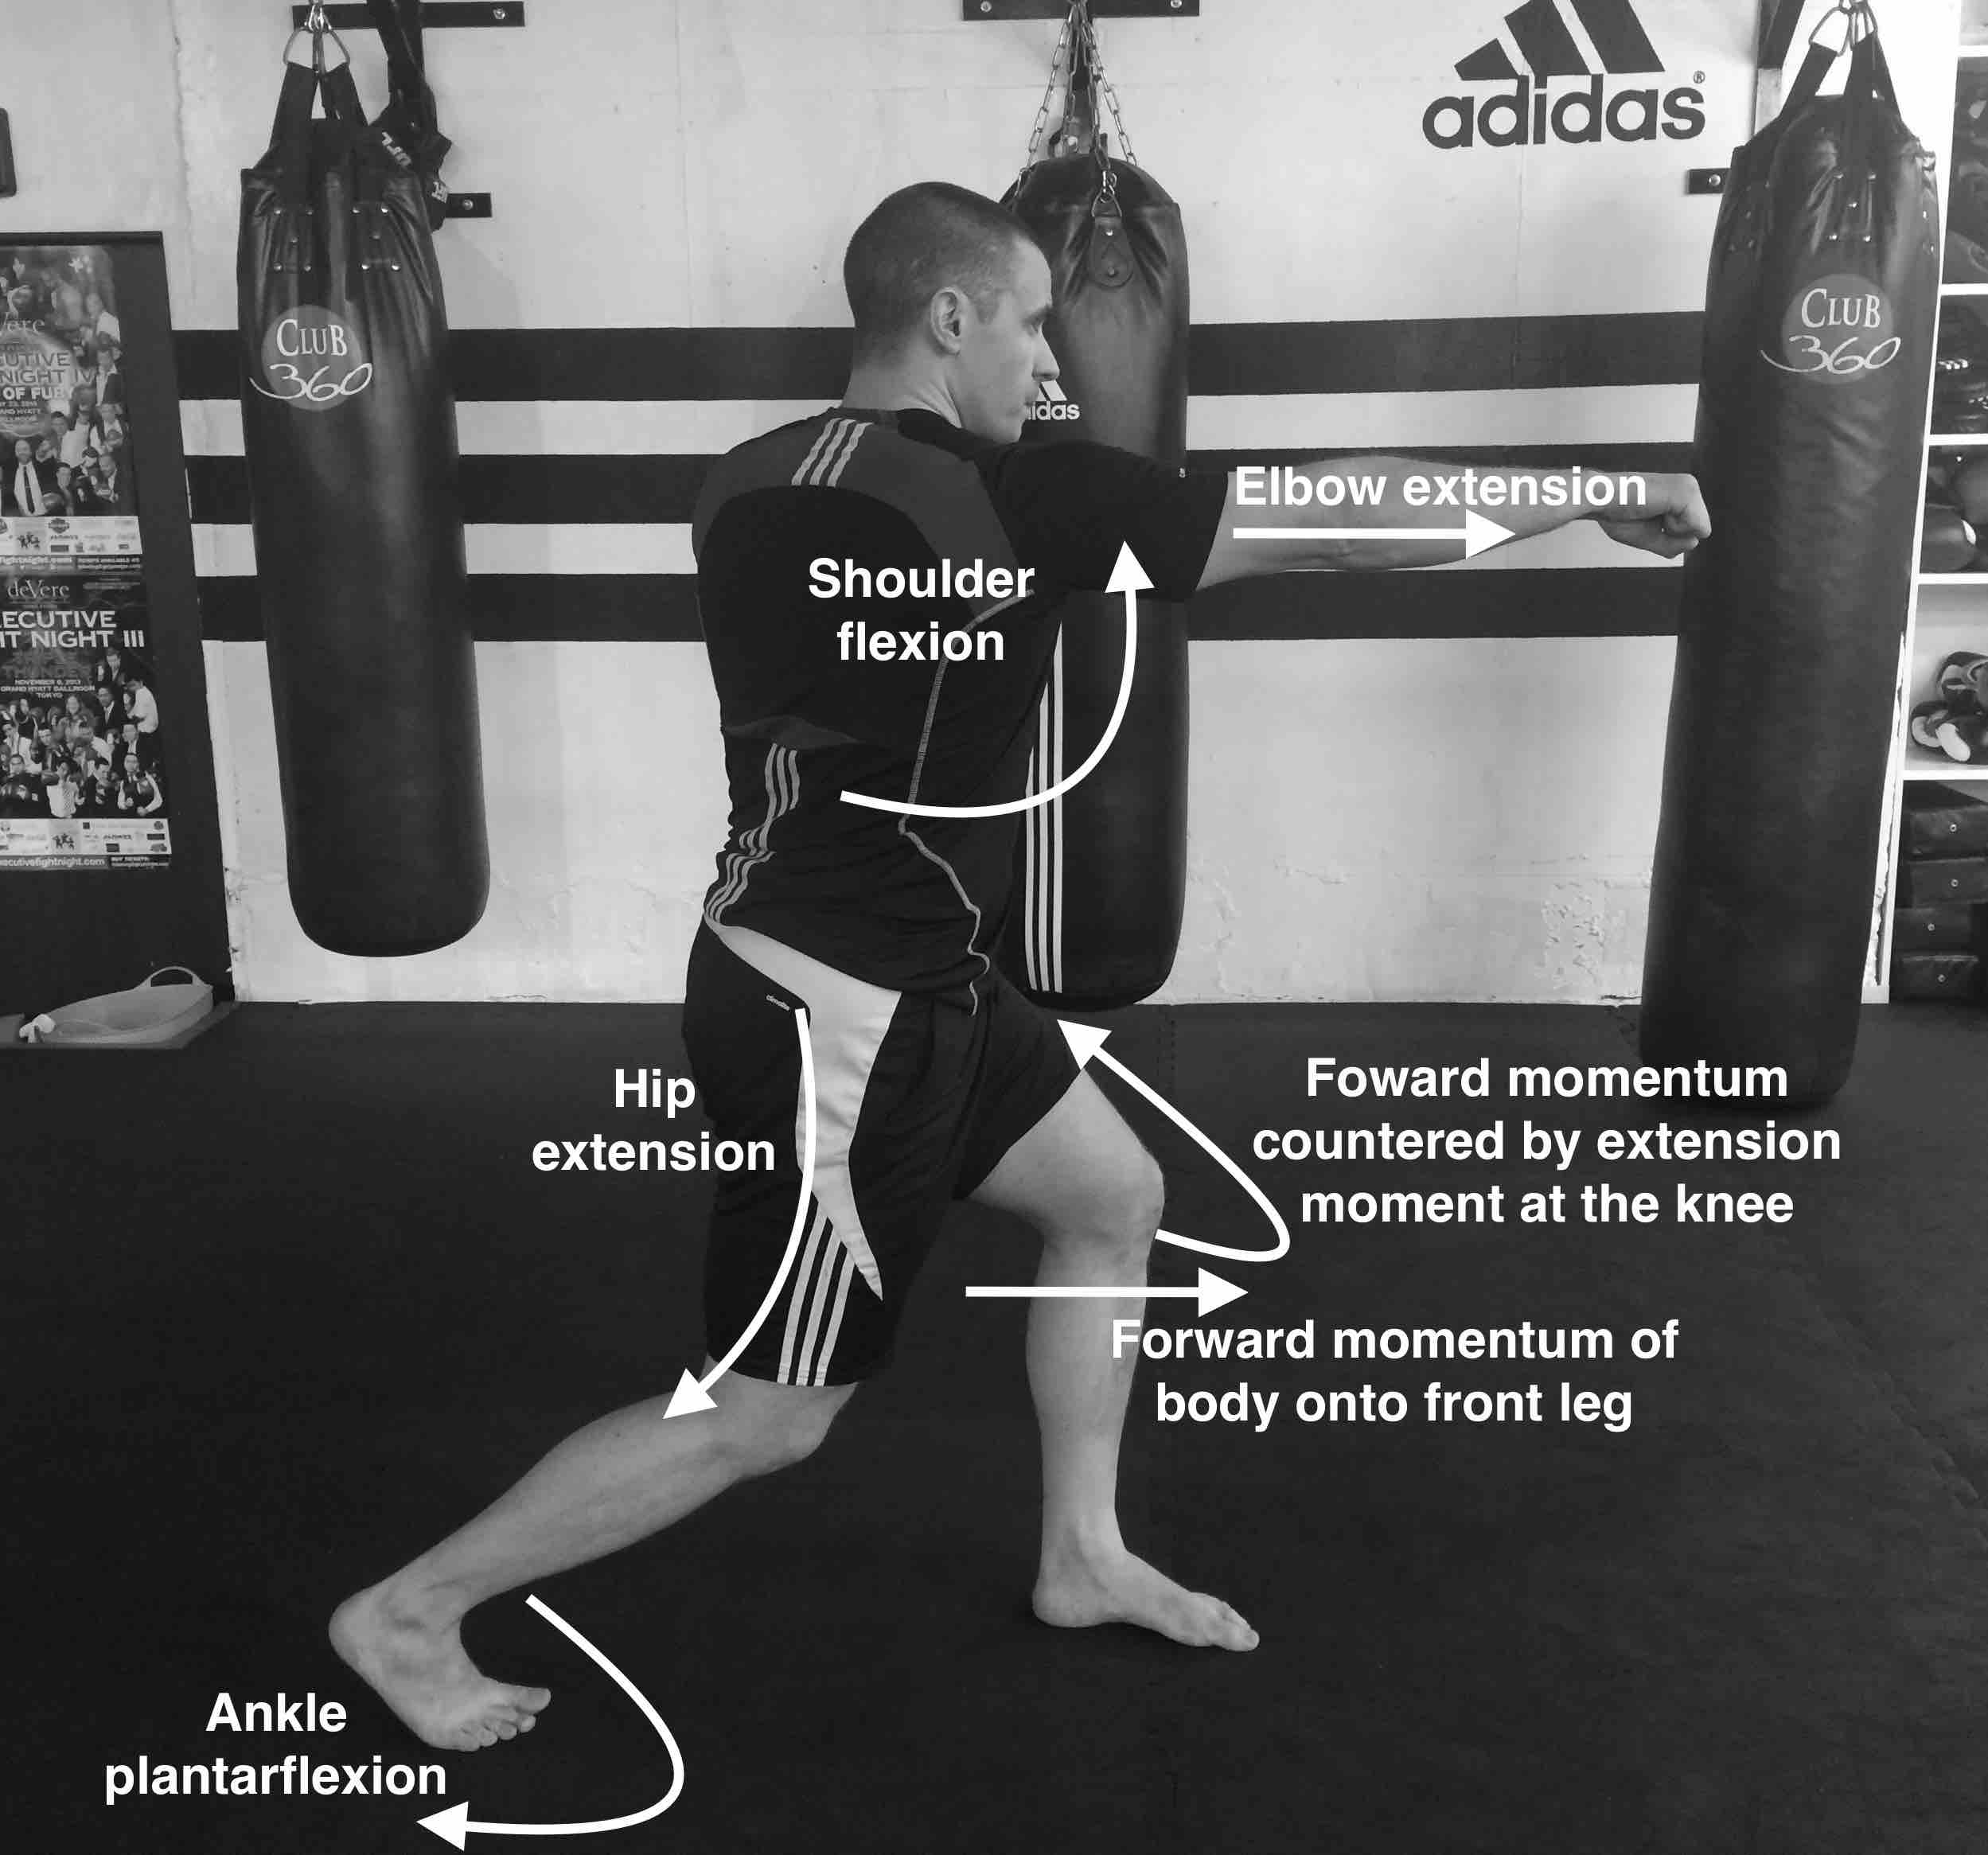 Is hitting the chest/heart area considered not effective in boxing